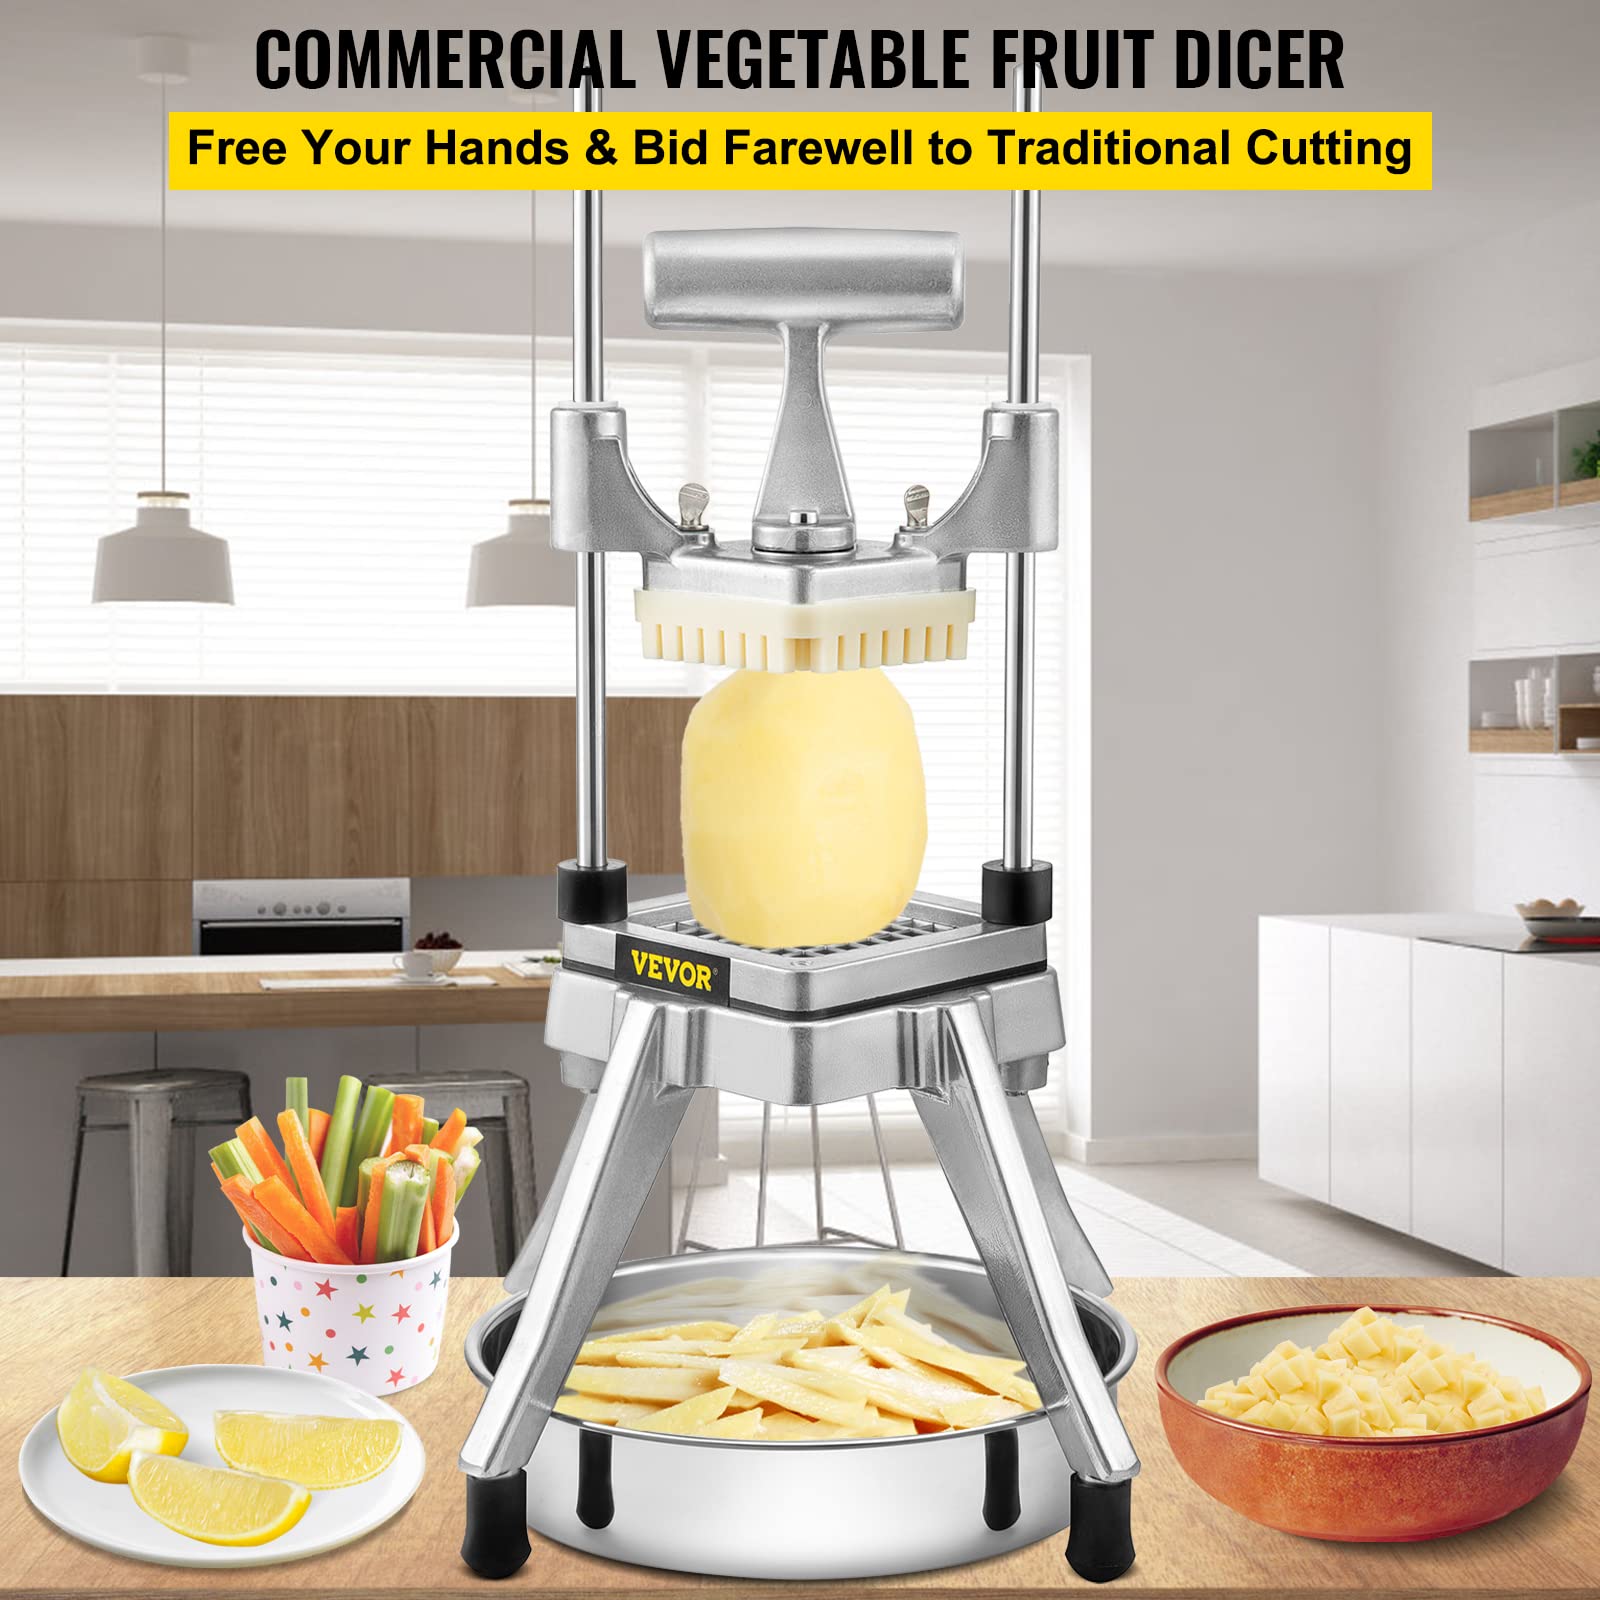 VEVOR Commercial Vegetable Fruit Chopper, Stainless Steel French Fry Cutter w/ 4 Blades 1/4